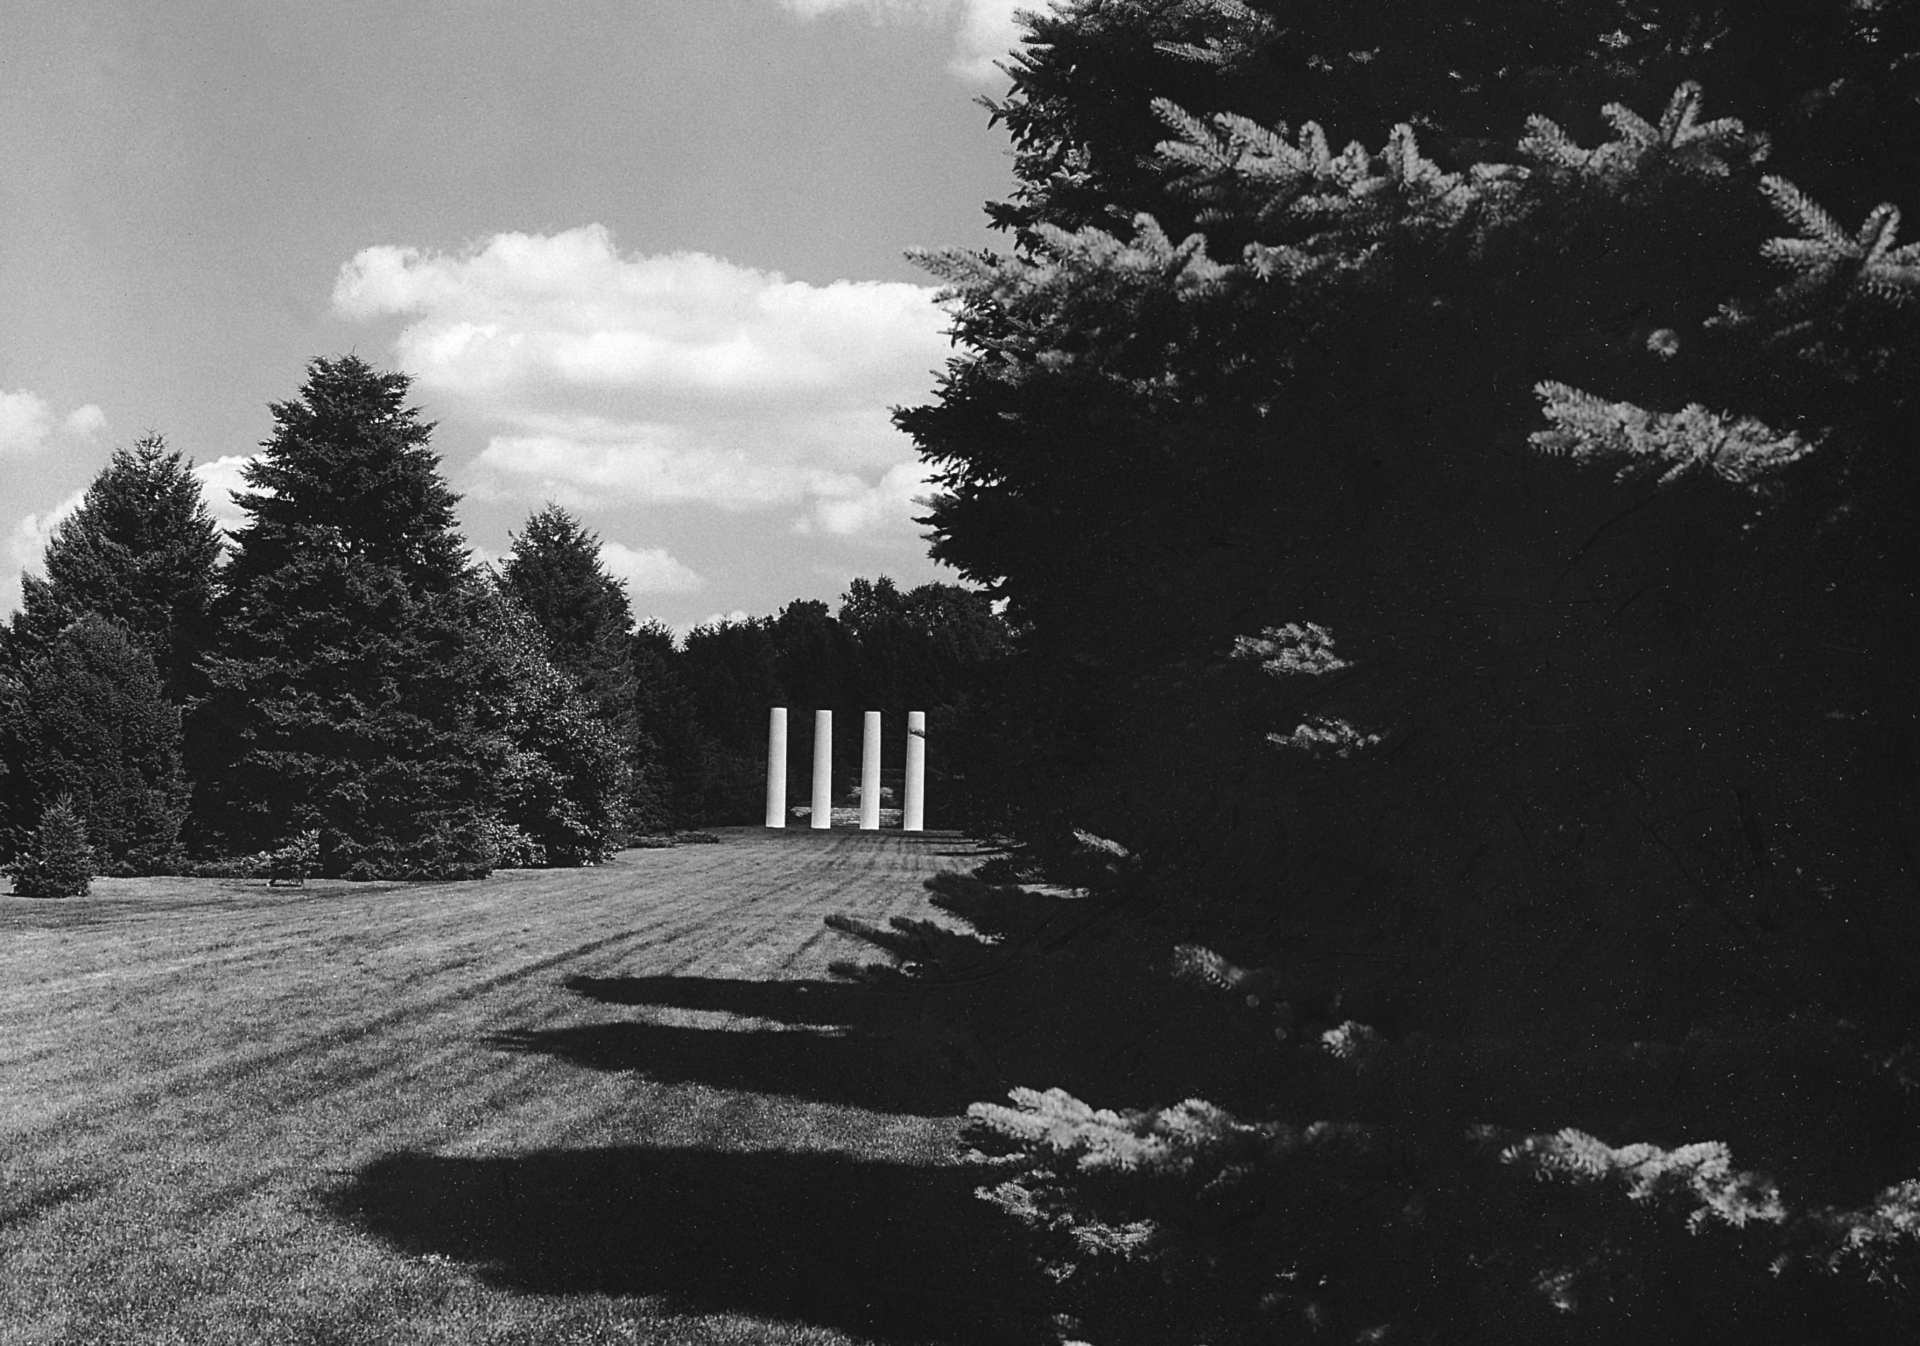 Black and white photo of the four columns and hedge garden